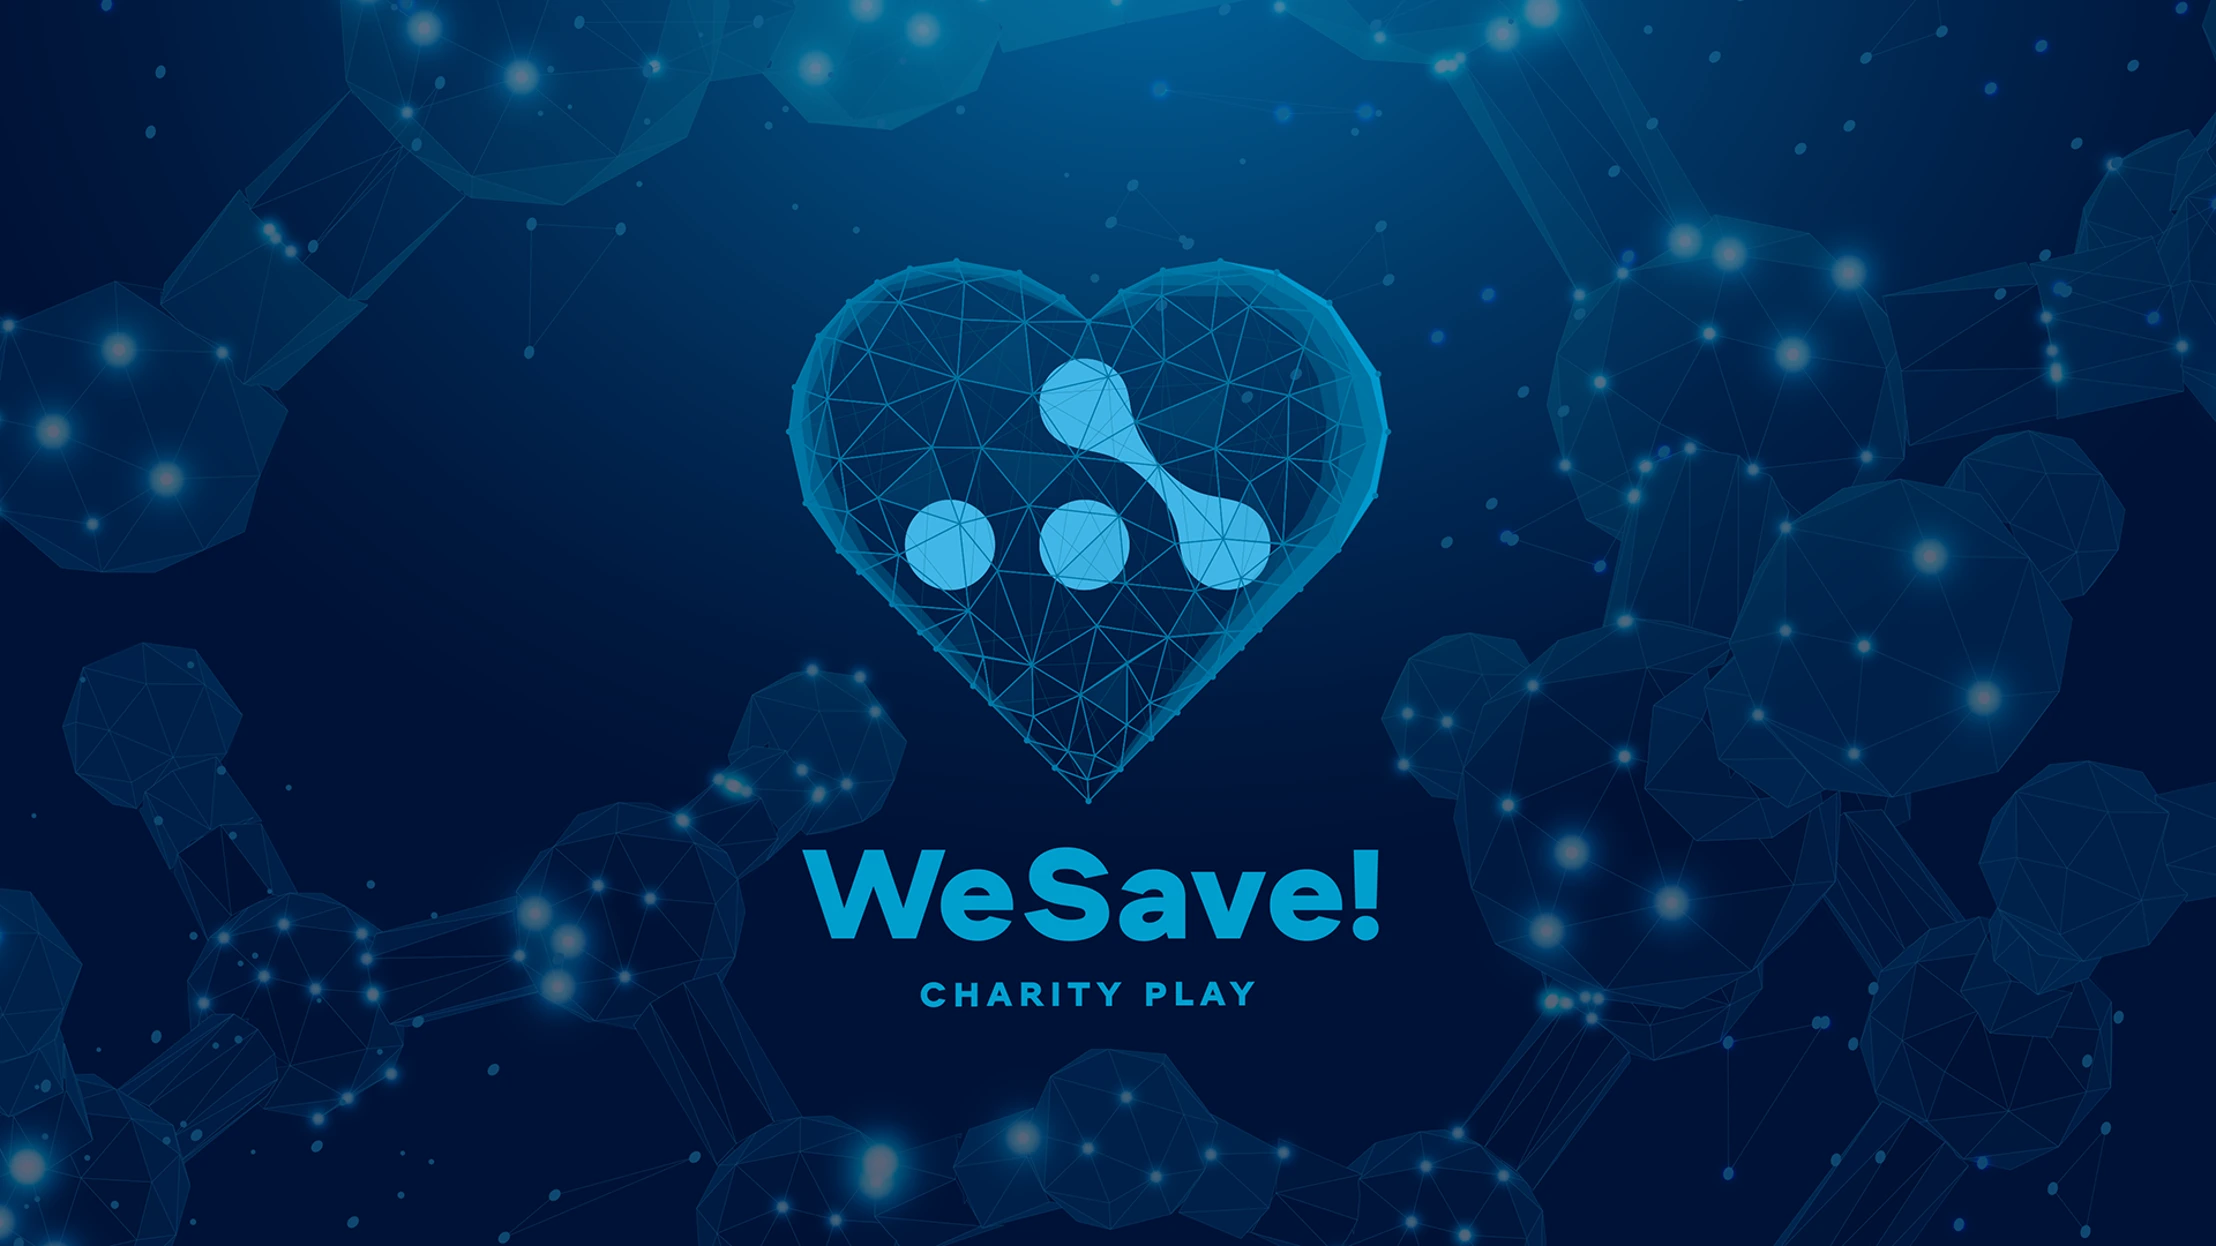 OG, NAVI, FURIA Esports, and CR4ZY are joining the fight to save the world